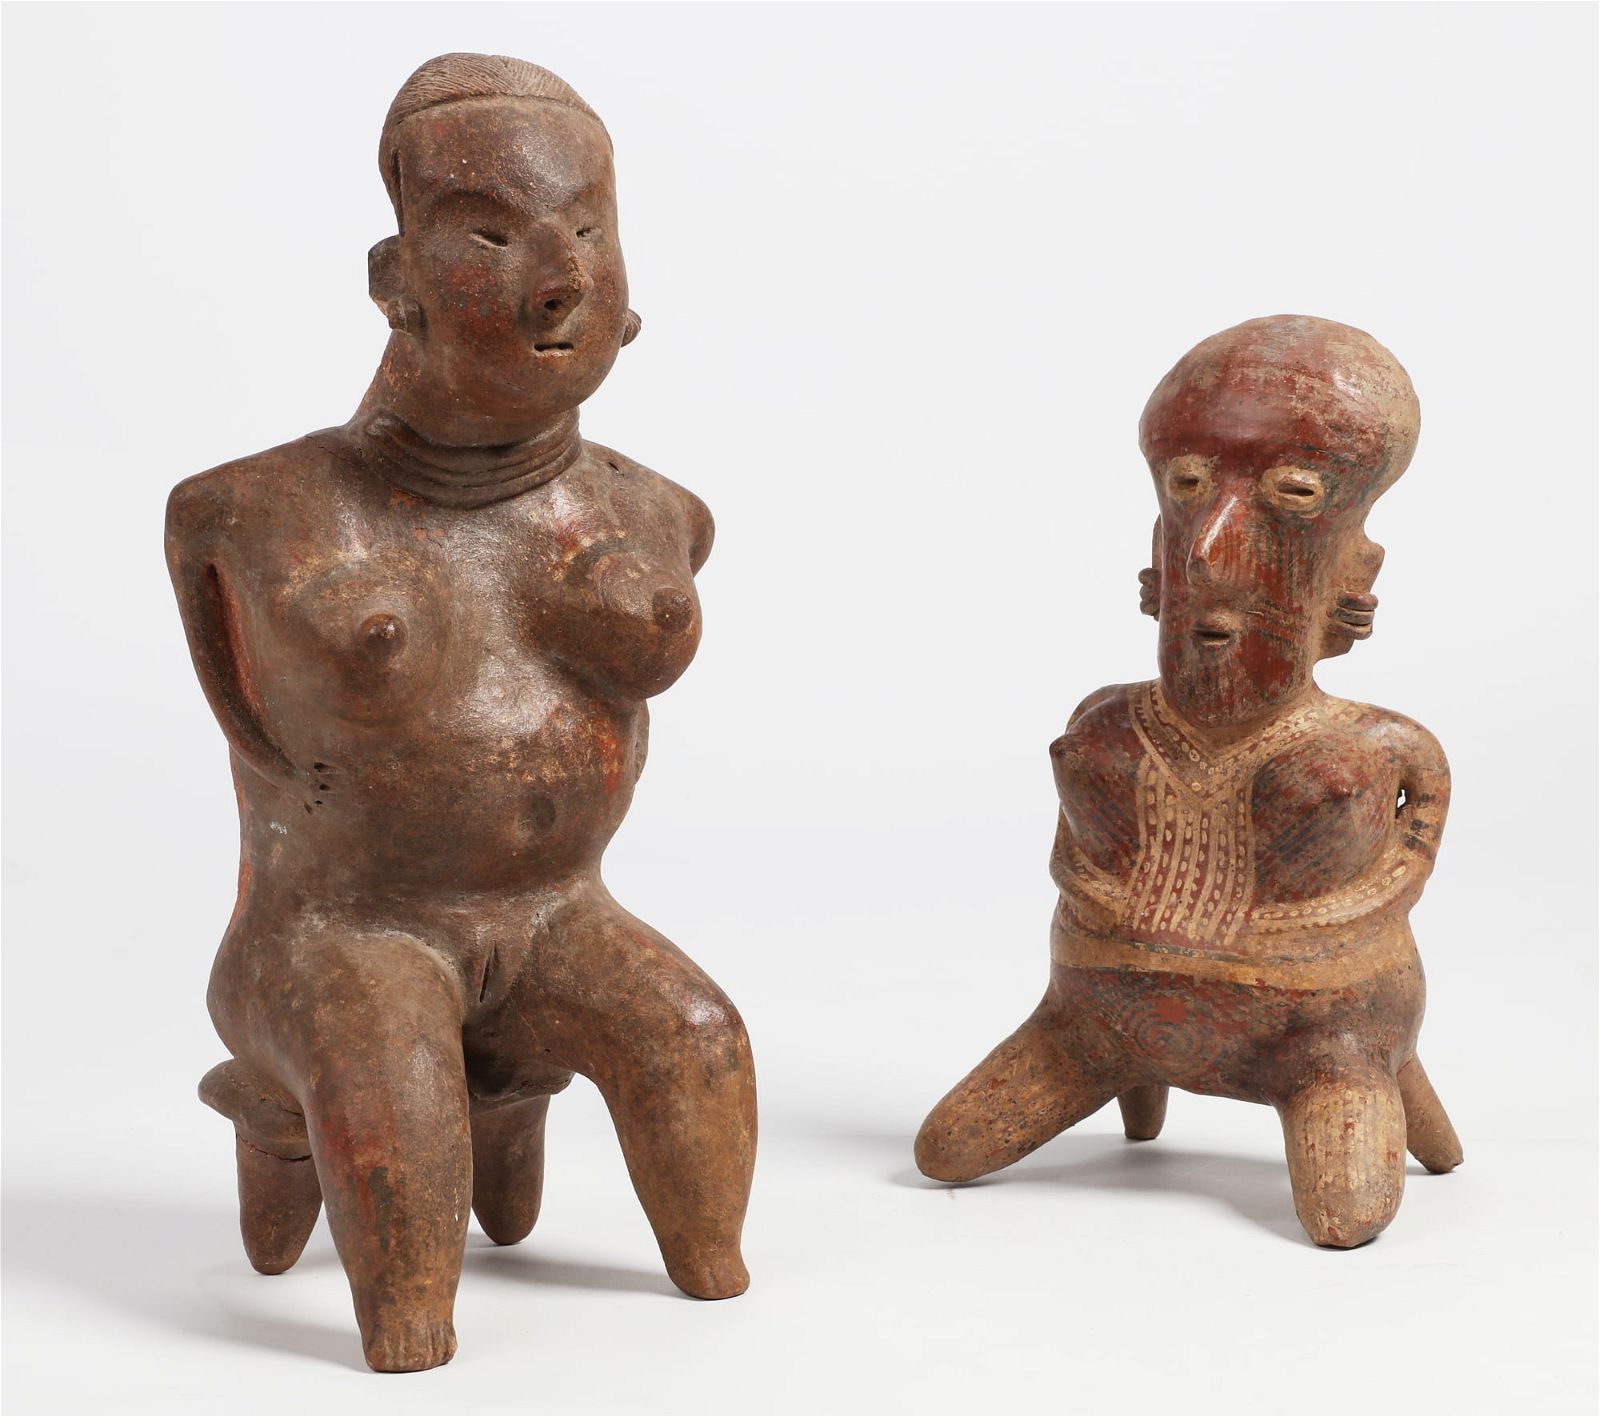 TWO SOUTH AMERICAN POTTERY FIGURESTwo 2fb43aa